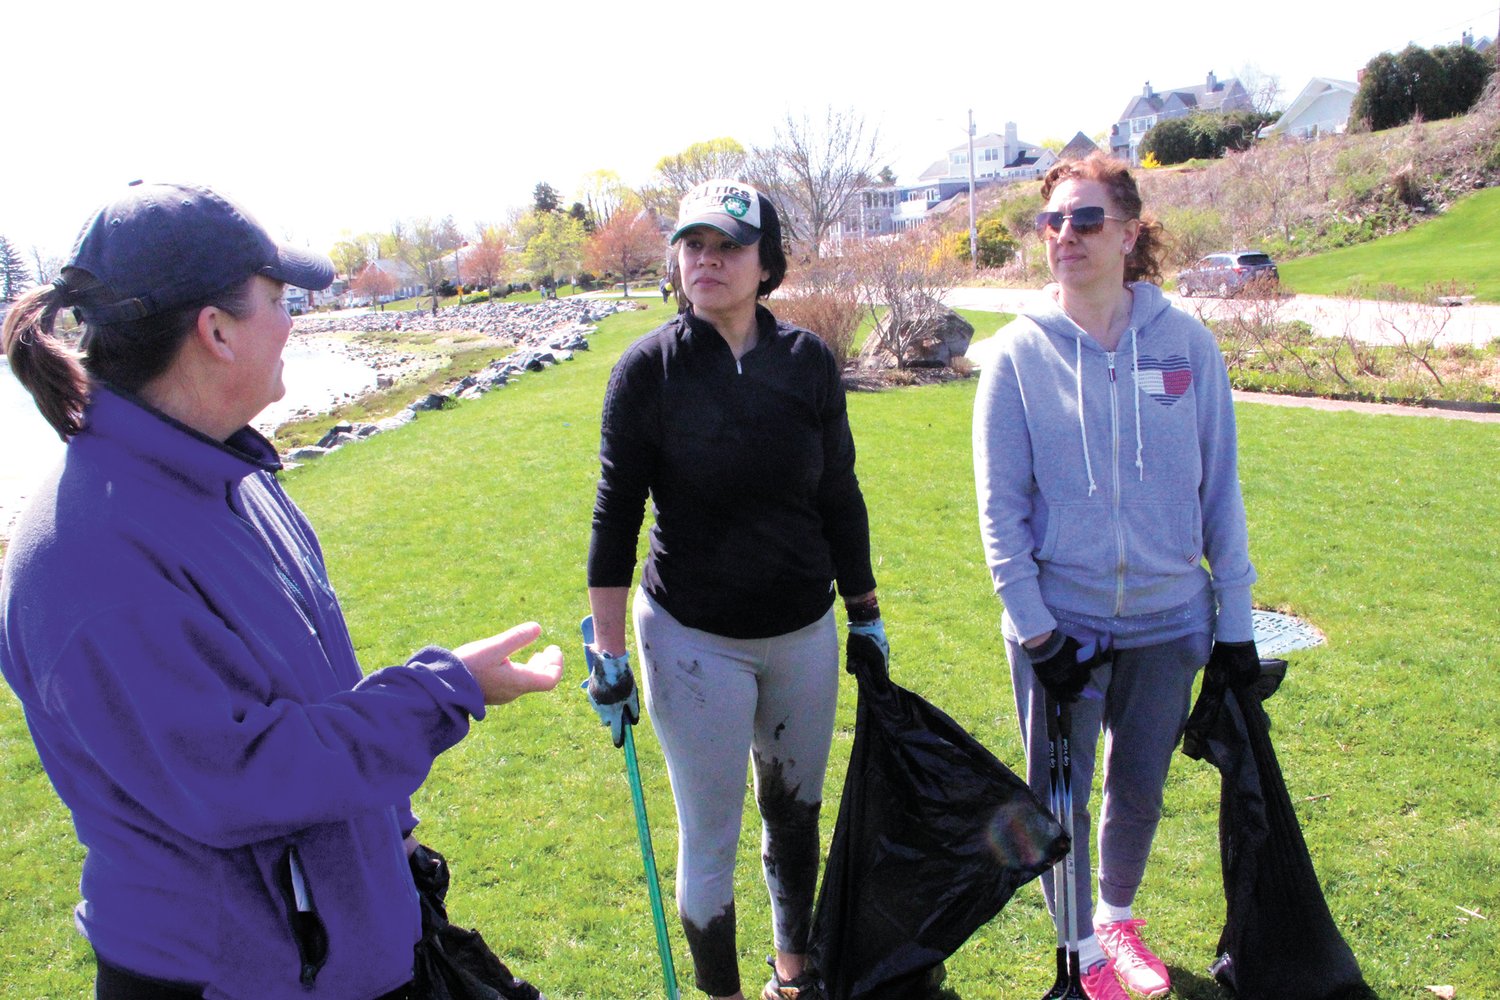 HELPING OUT: CD2 candidate Joy Fox (left), Councilwoman Lammis Vargas (middle) and Councilwoman Jessica Marino came to help cleanup Stillhouse Cove on Saturday.